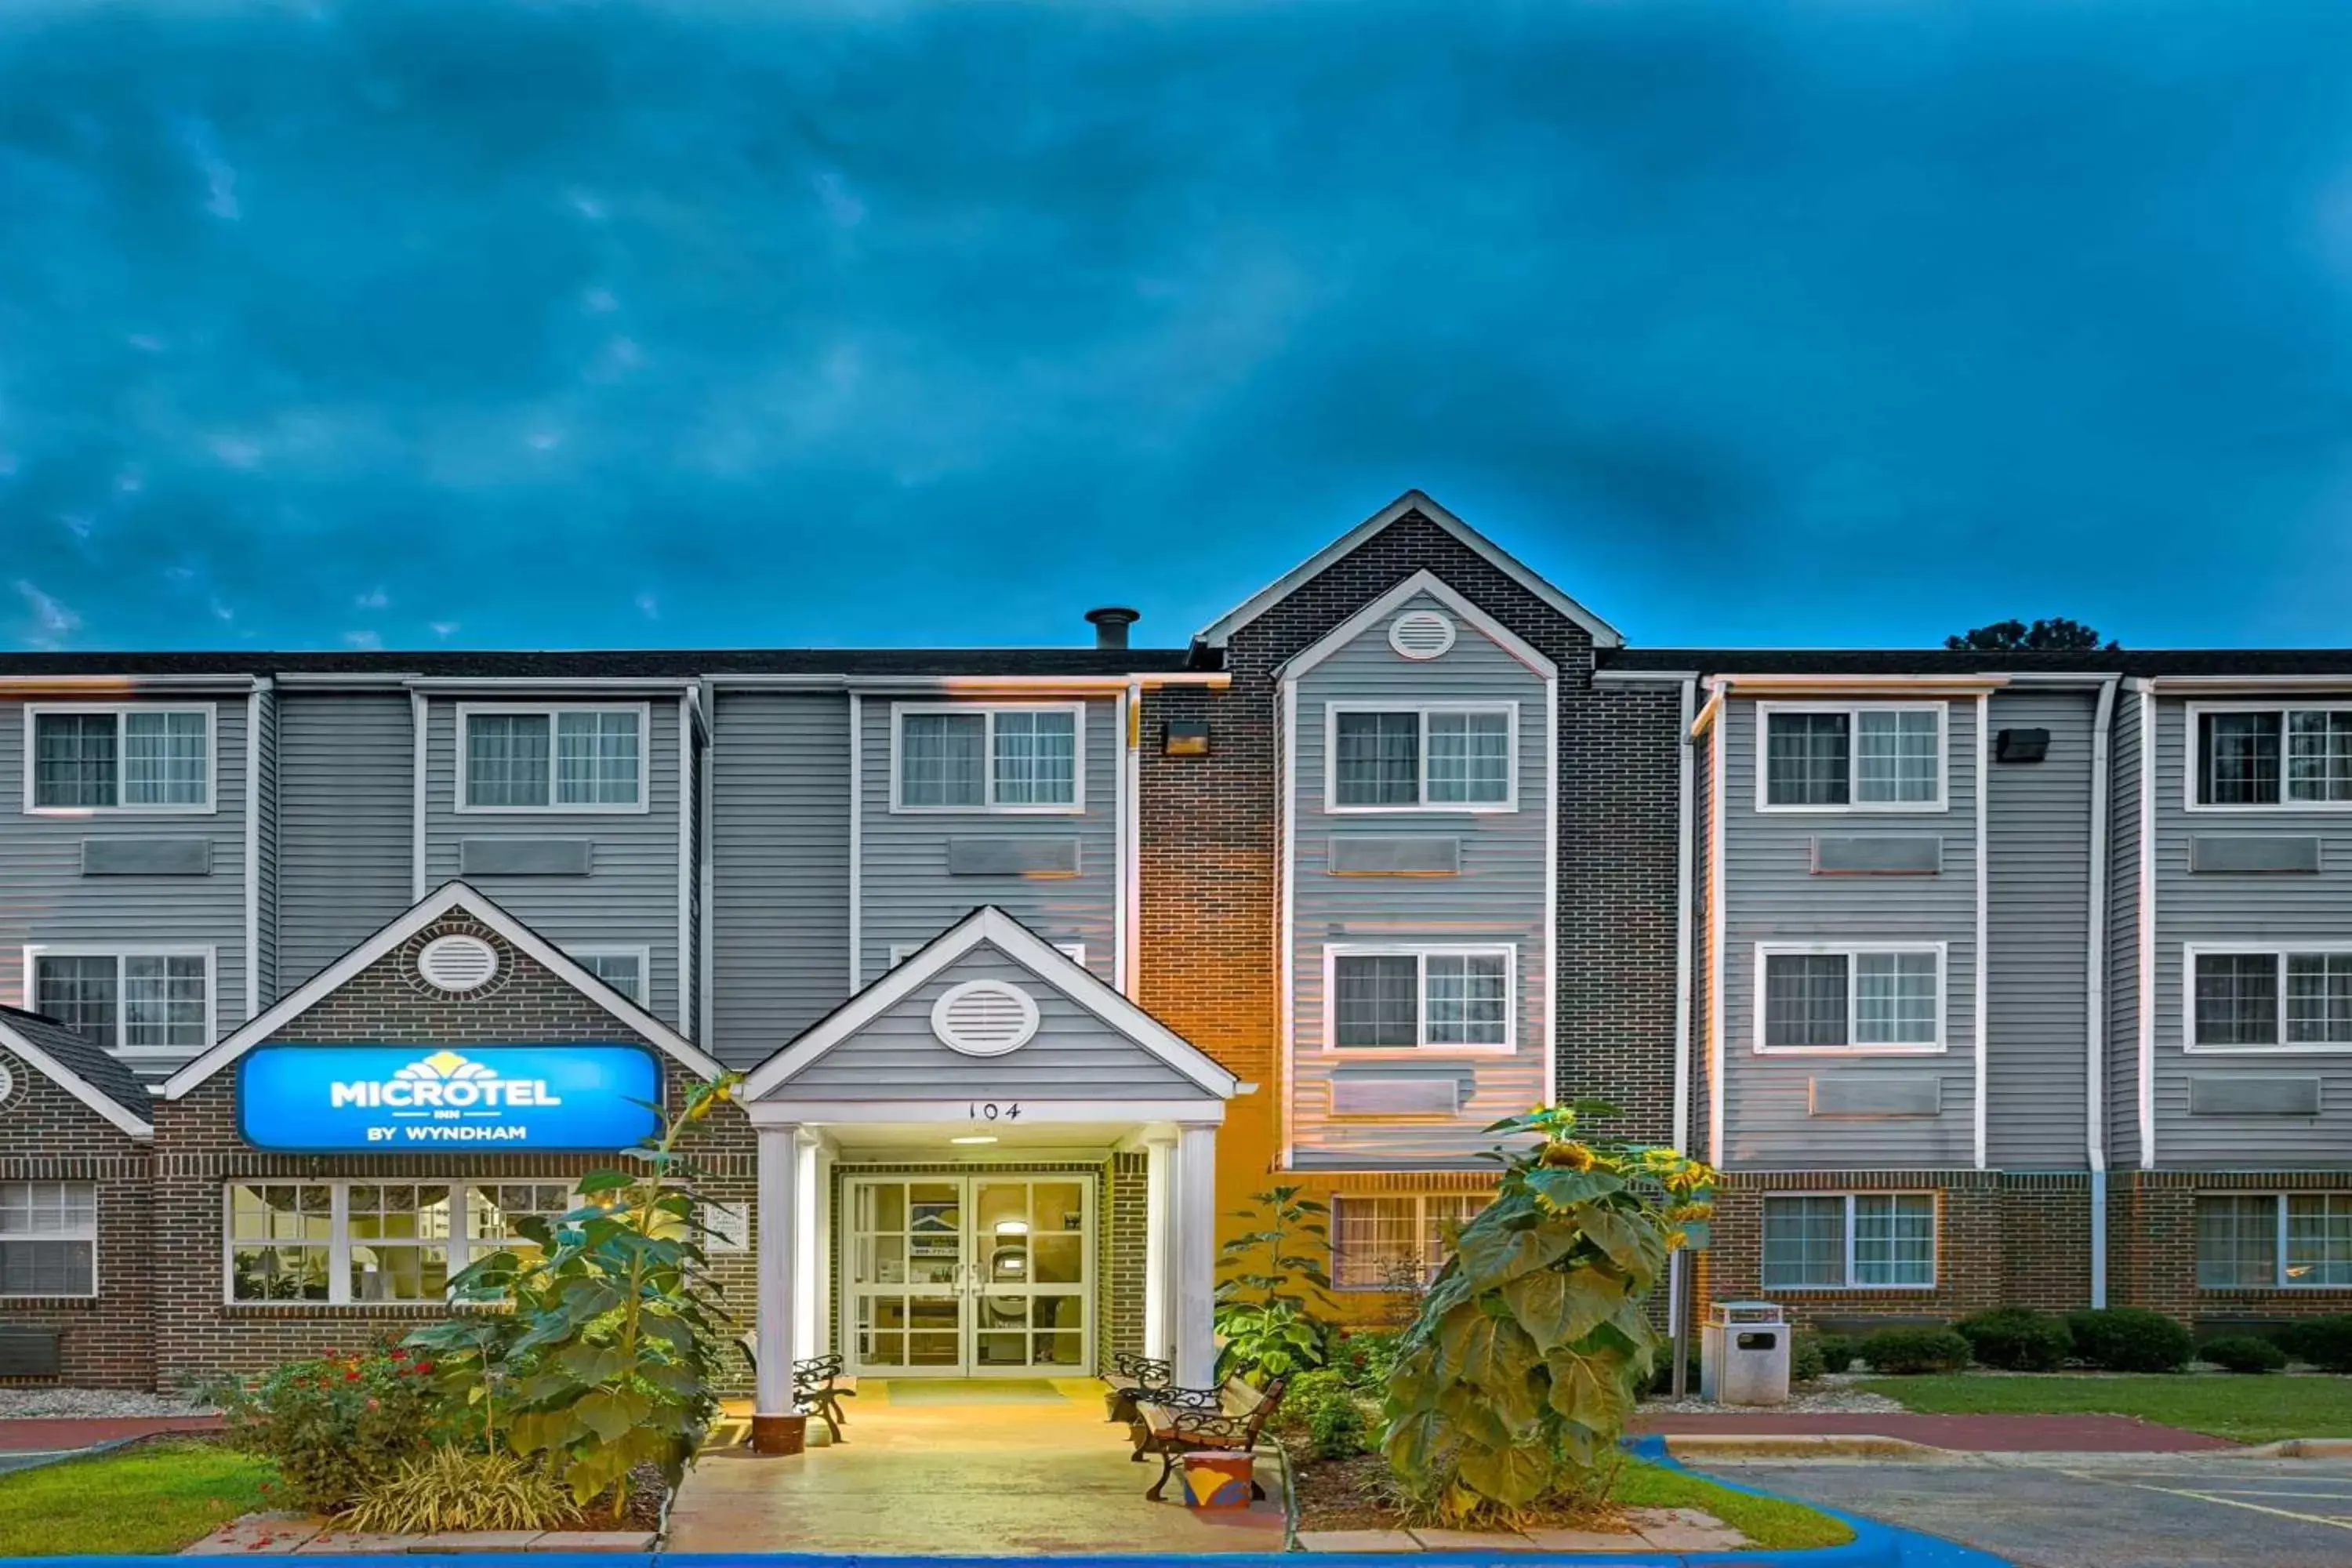 Property building in Microtel Inn by Wyndham Raleigh-Durham Airport